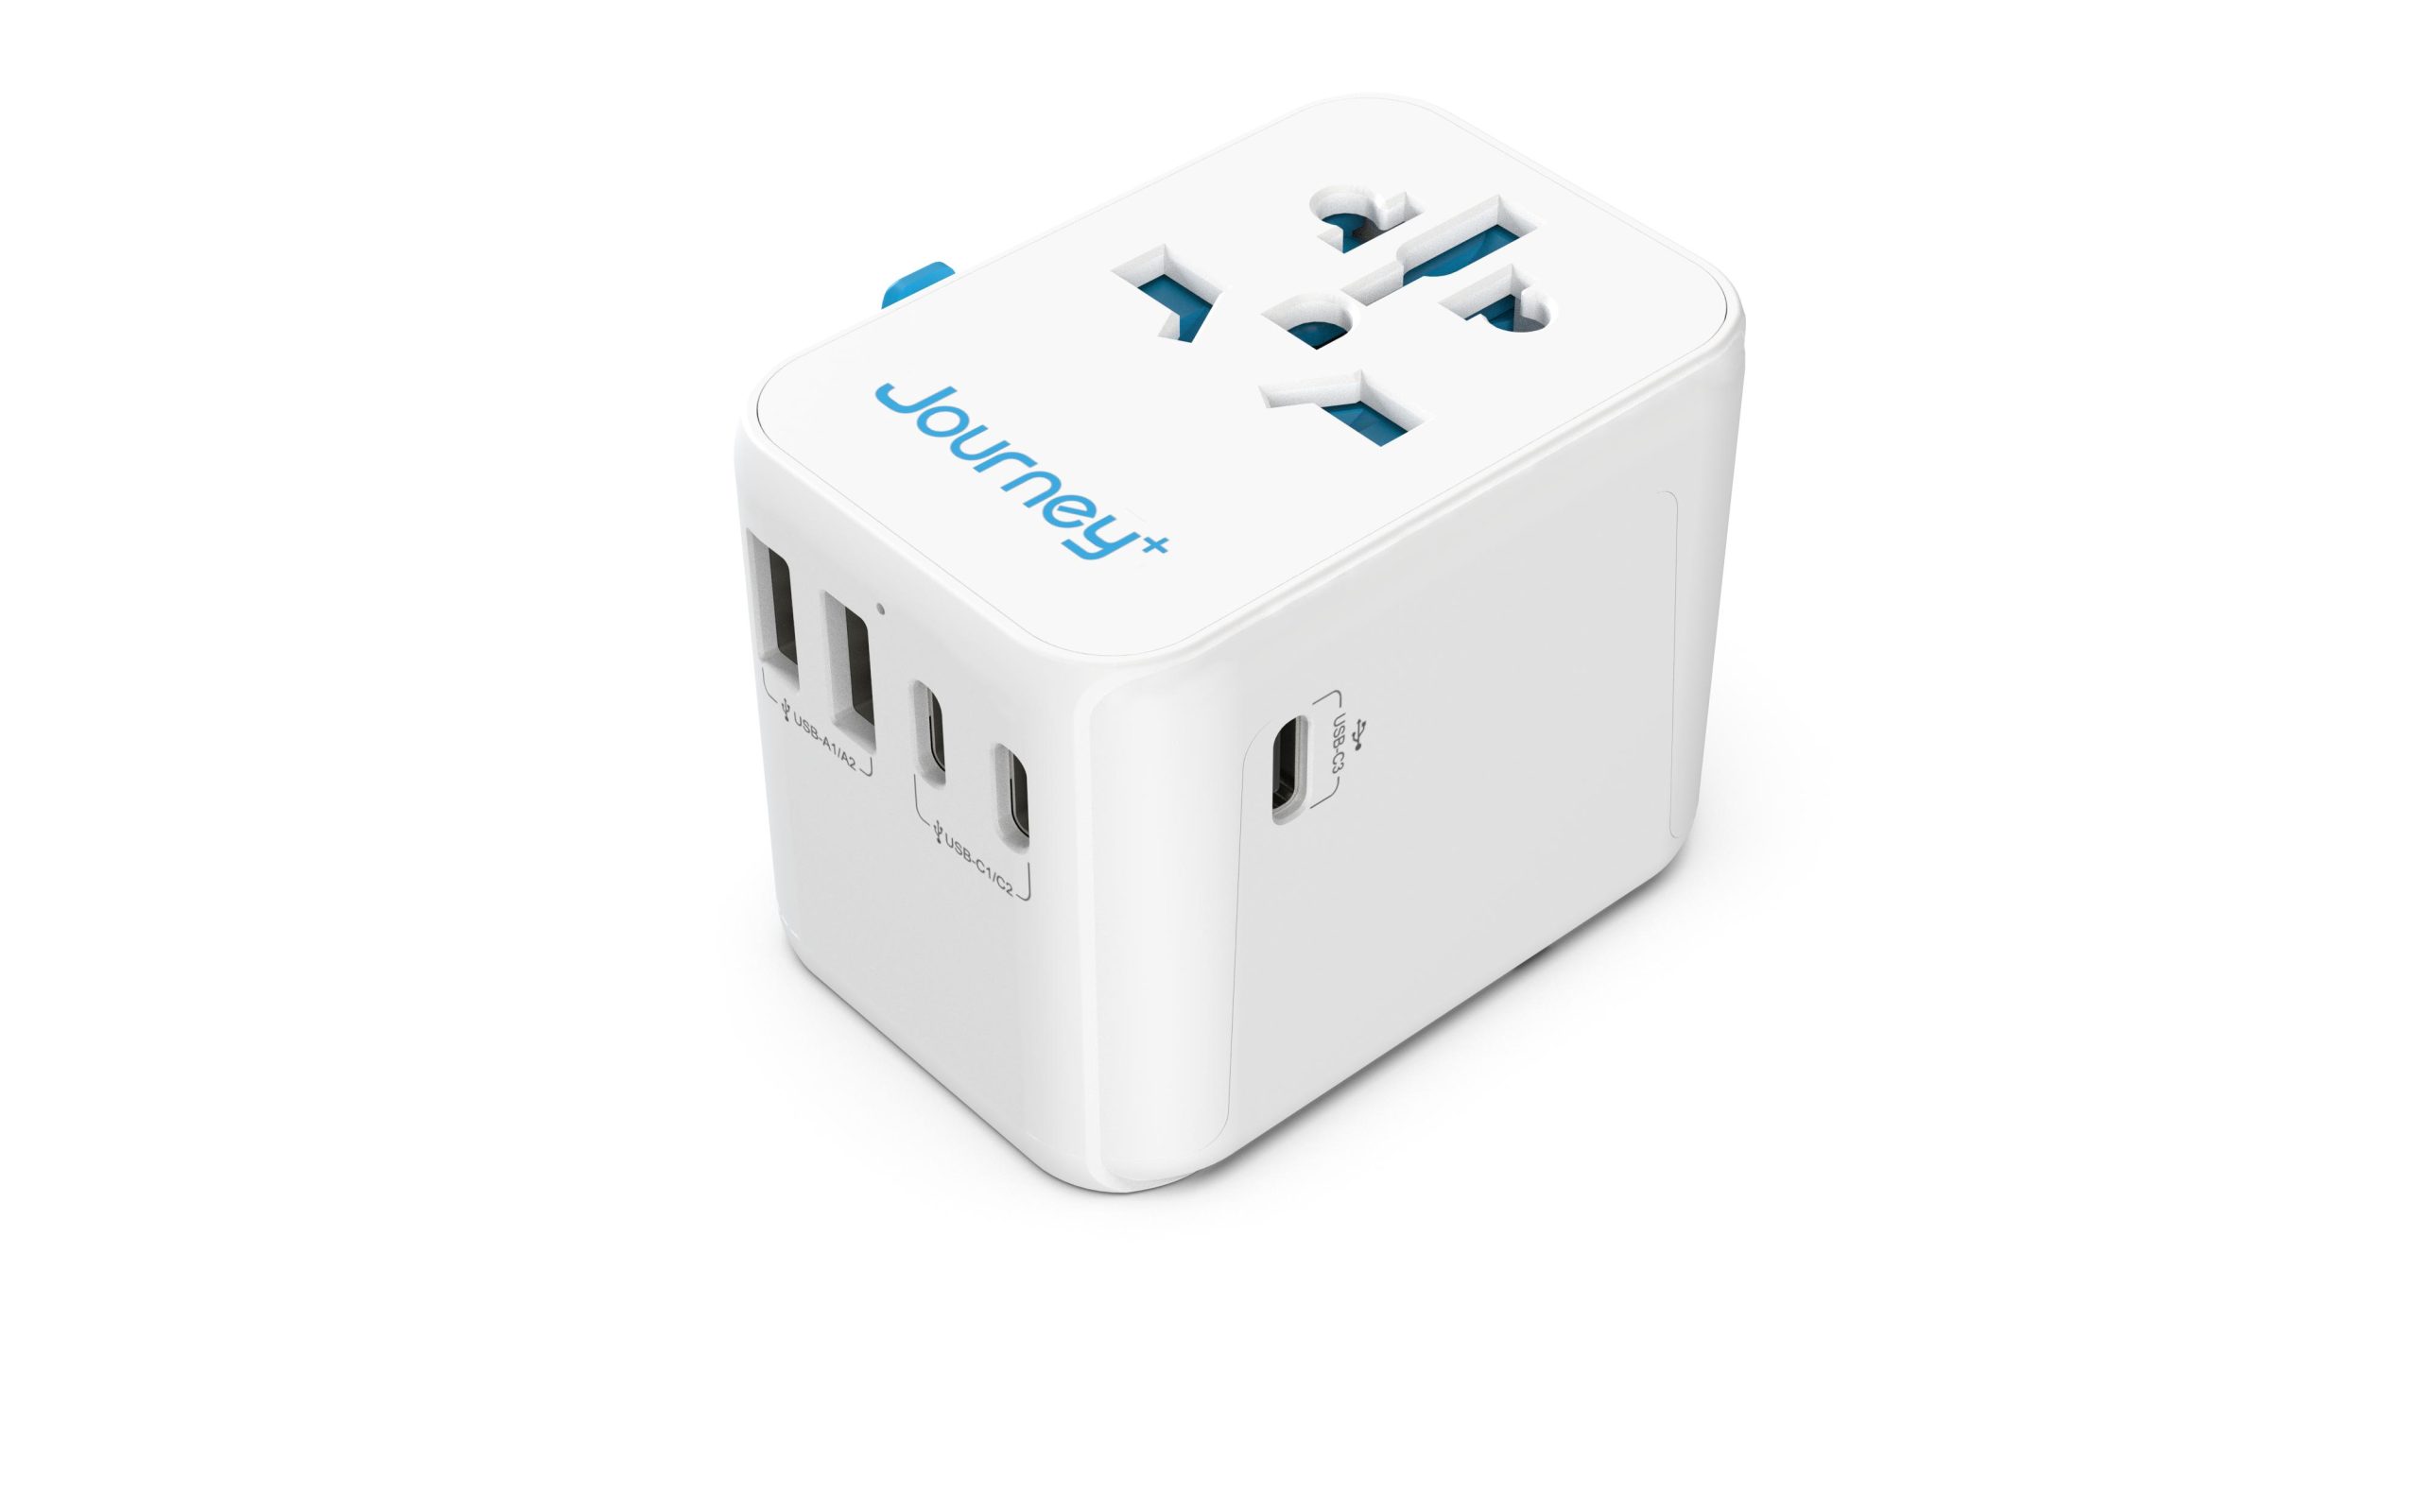 NINE USB CHARGER 4 PORTS 65W JOURNEY ADAPTER